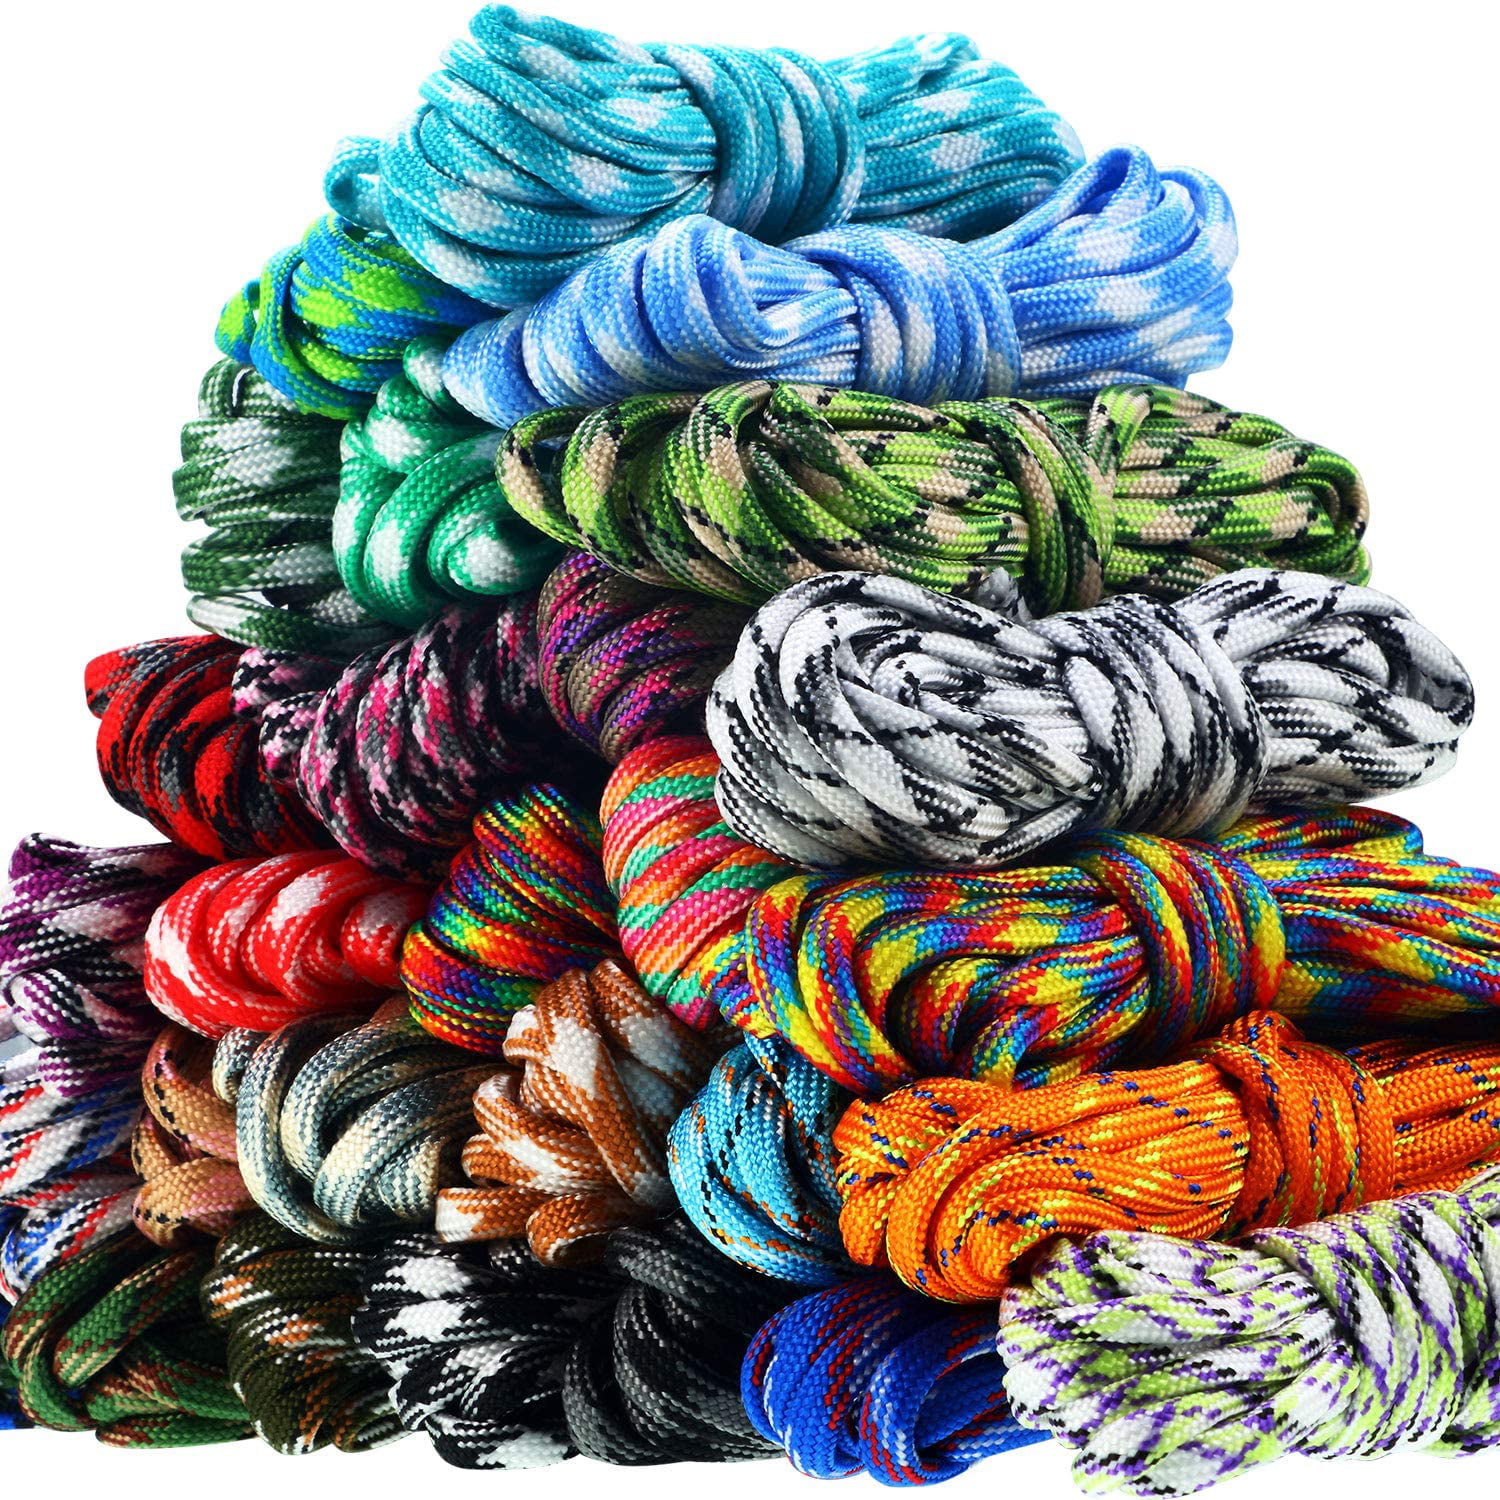 WILLBOND 28 Colors 10 Feet Paracord Cord 550 Multifunction Paracord Ropes Paracord Bracelet Rope Crafting Making Rope Kit for Lanyards Keychain Dog Collar DIY Manual Braiding Supplies Solid Color 